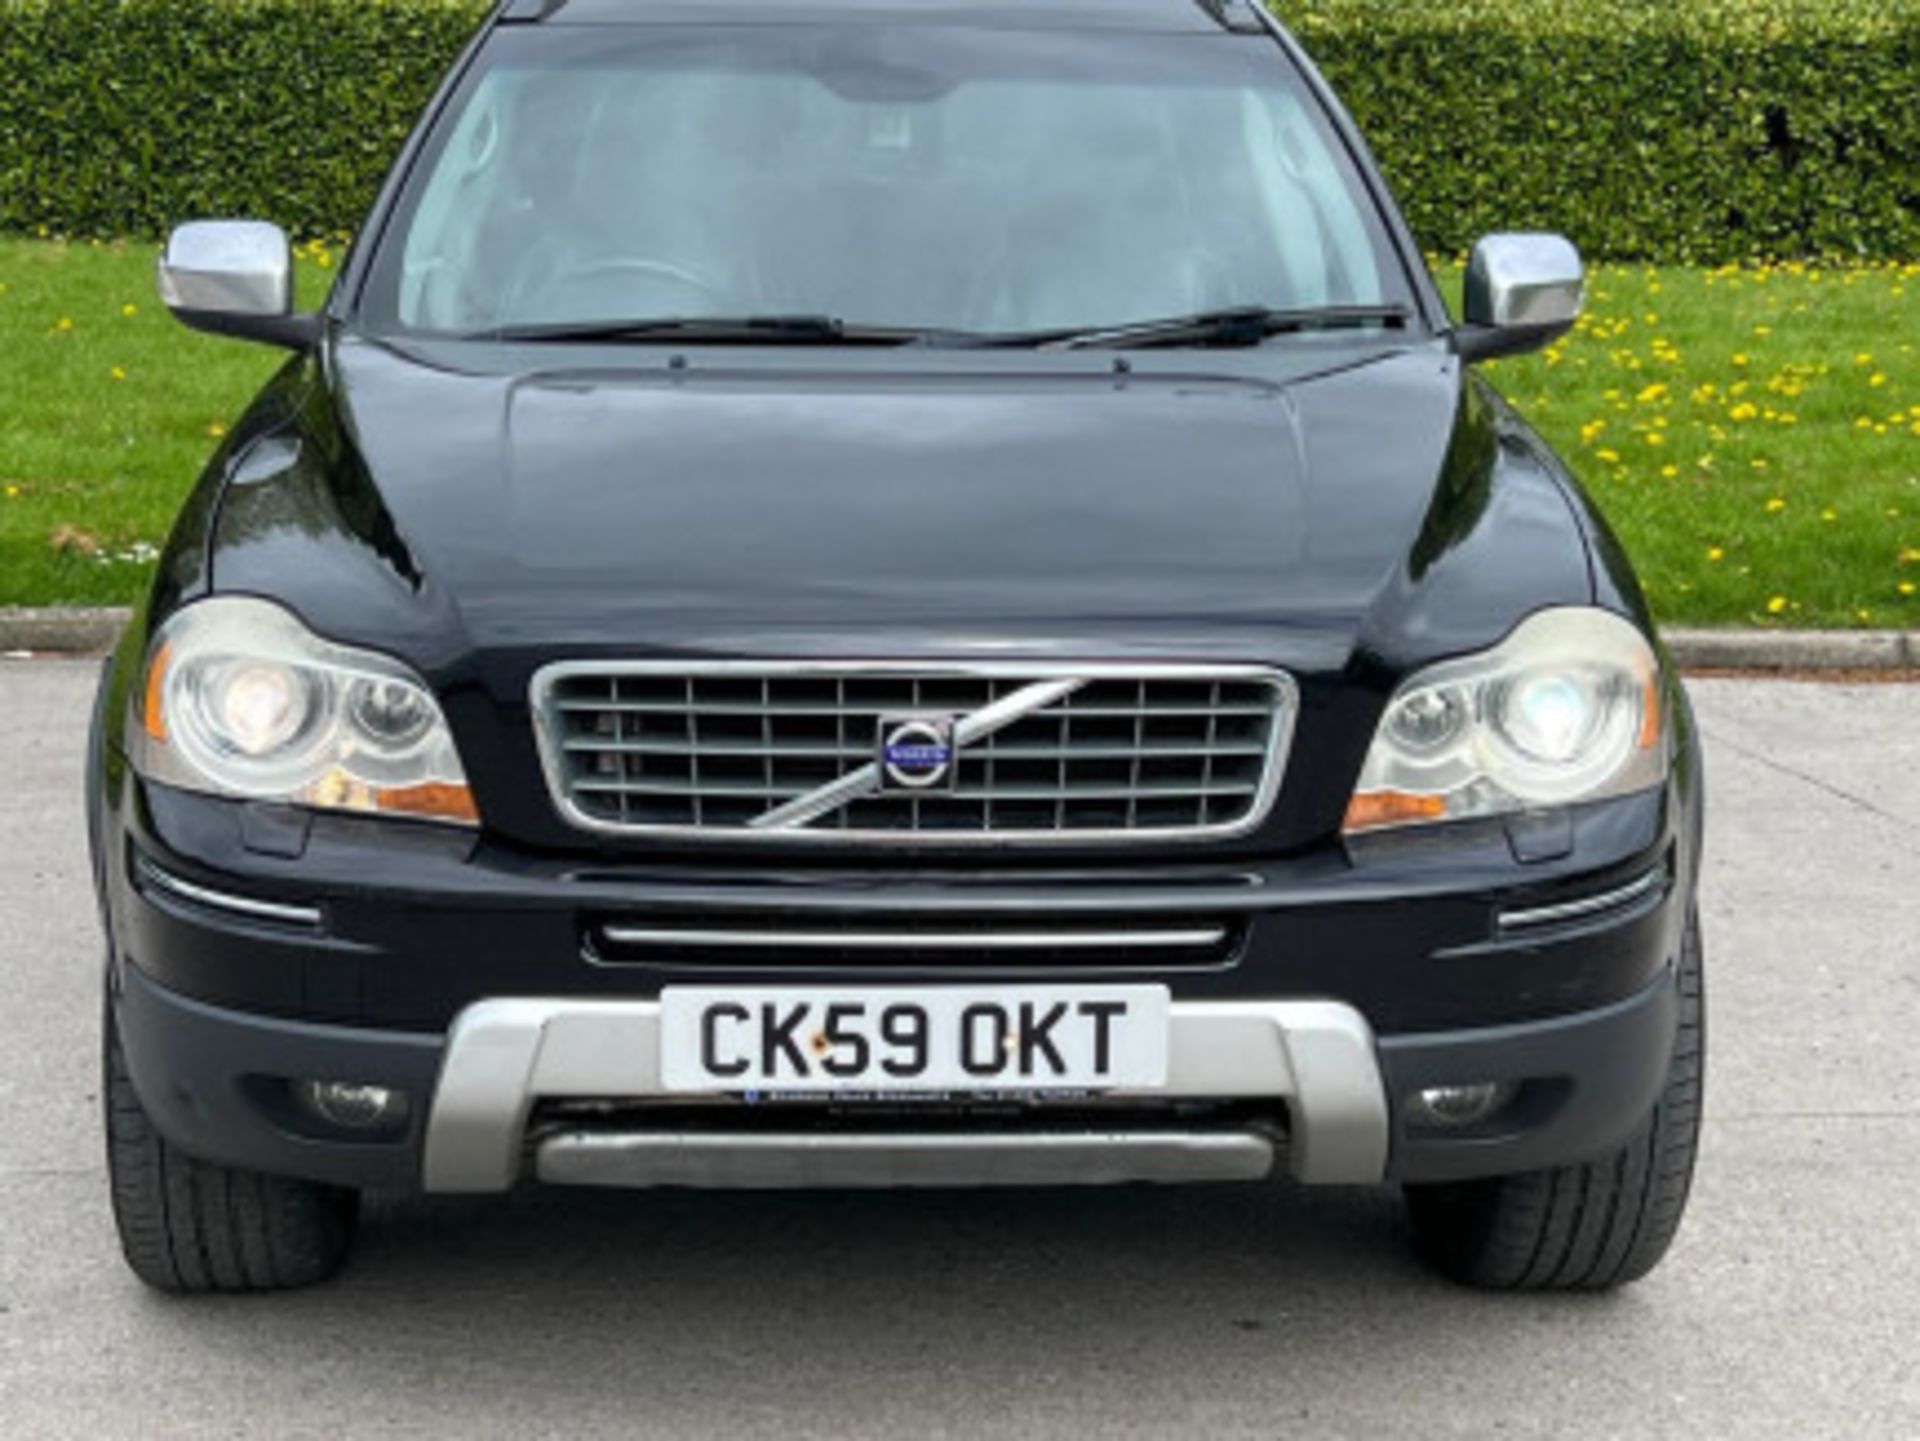 VOLVO XC90 2.4 D5 EXECUTIVE GEARTRONIC AWD, 5DR >>--NO VAT ON HAMMER--<< - Image 61 of 136